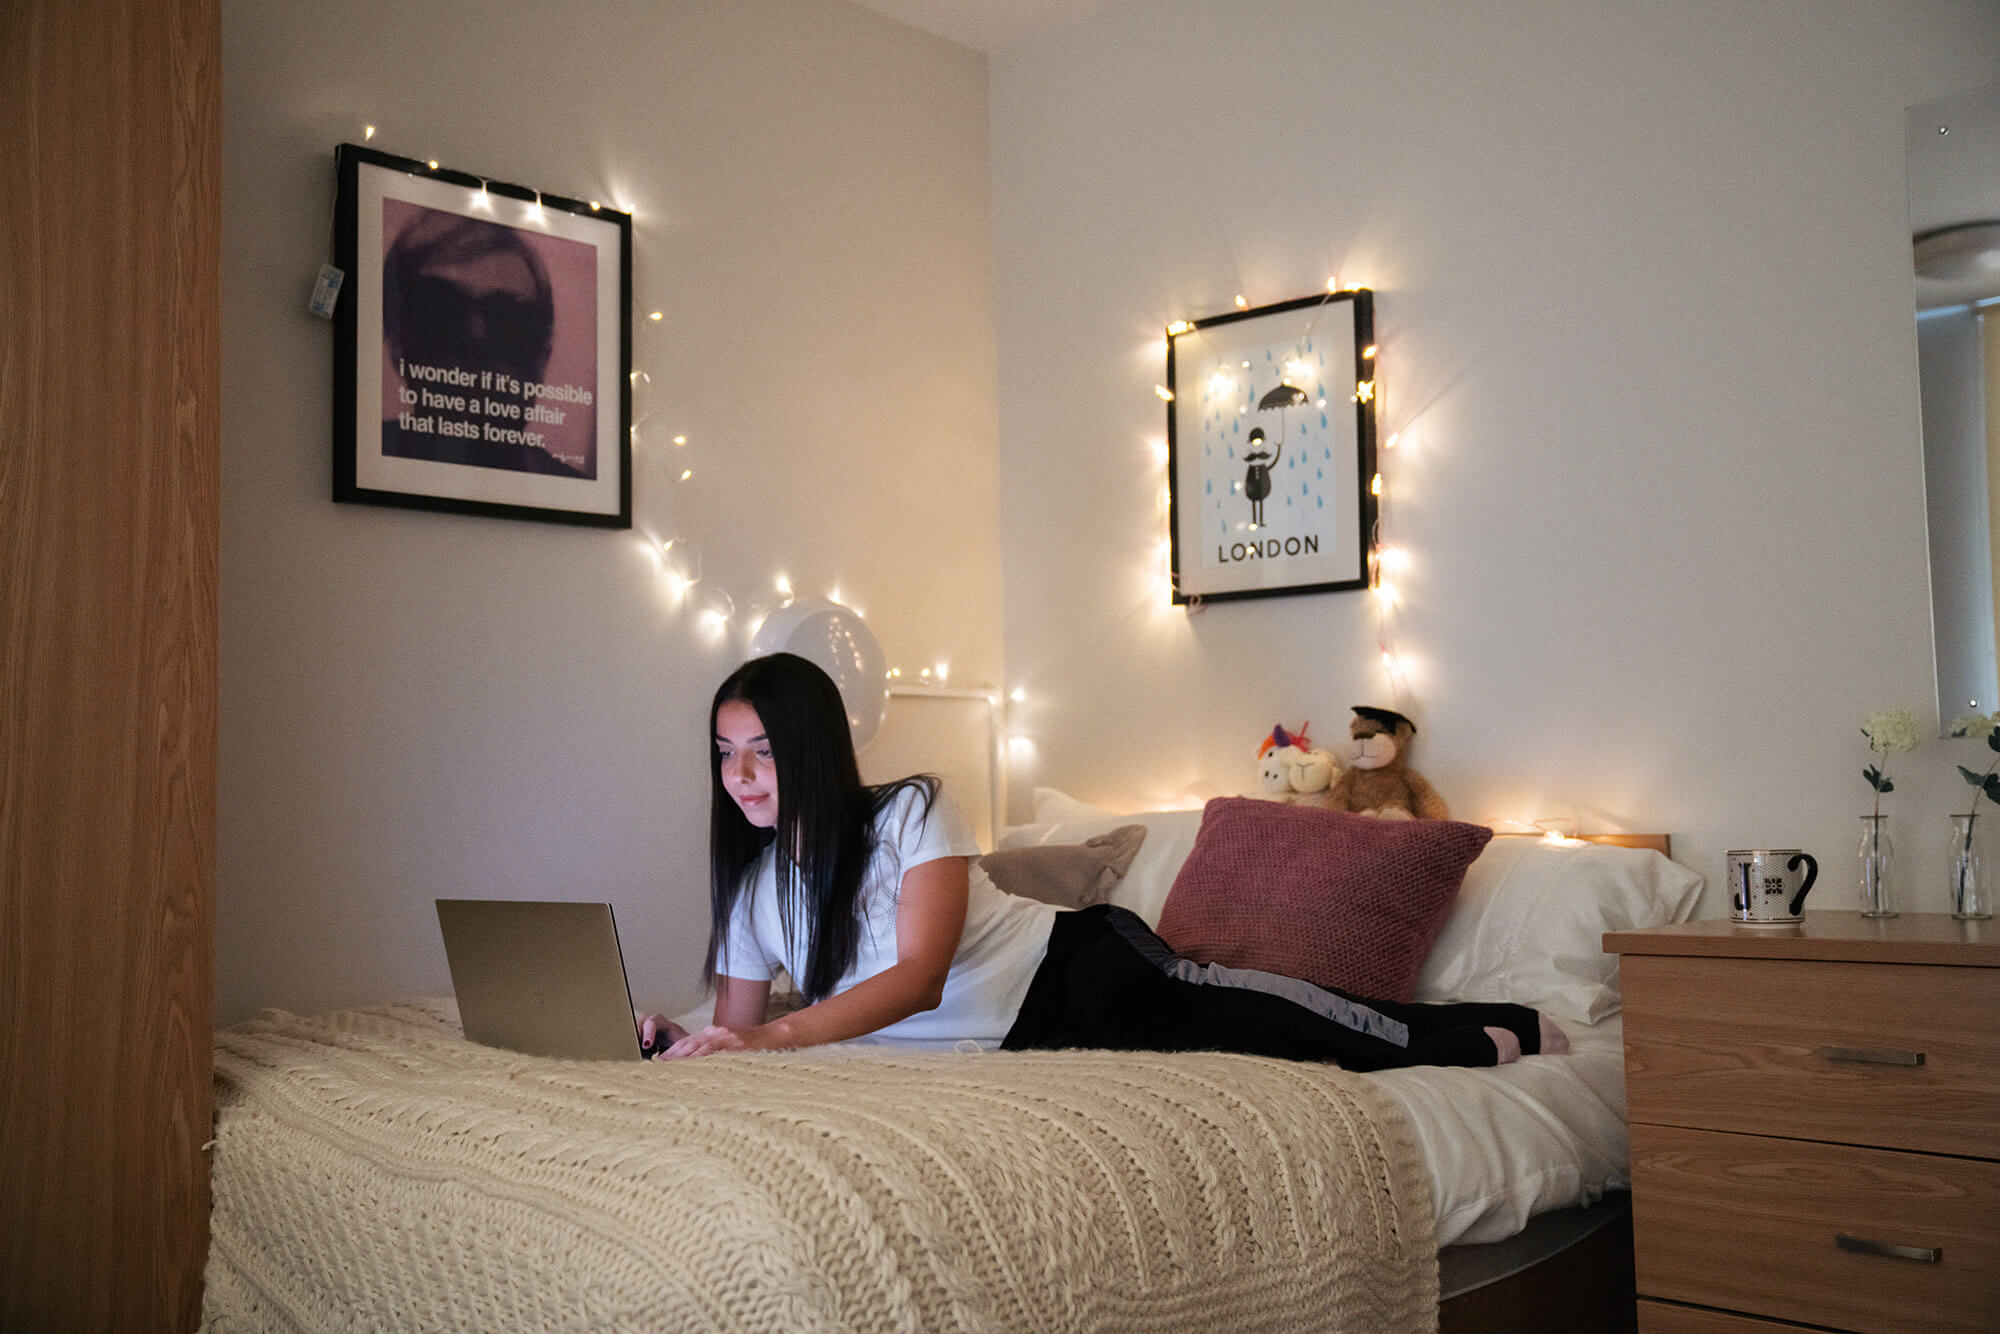 Uni Room Decor: Make Your Student Bedroom Your Own | iQ Student ...